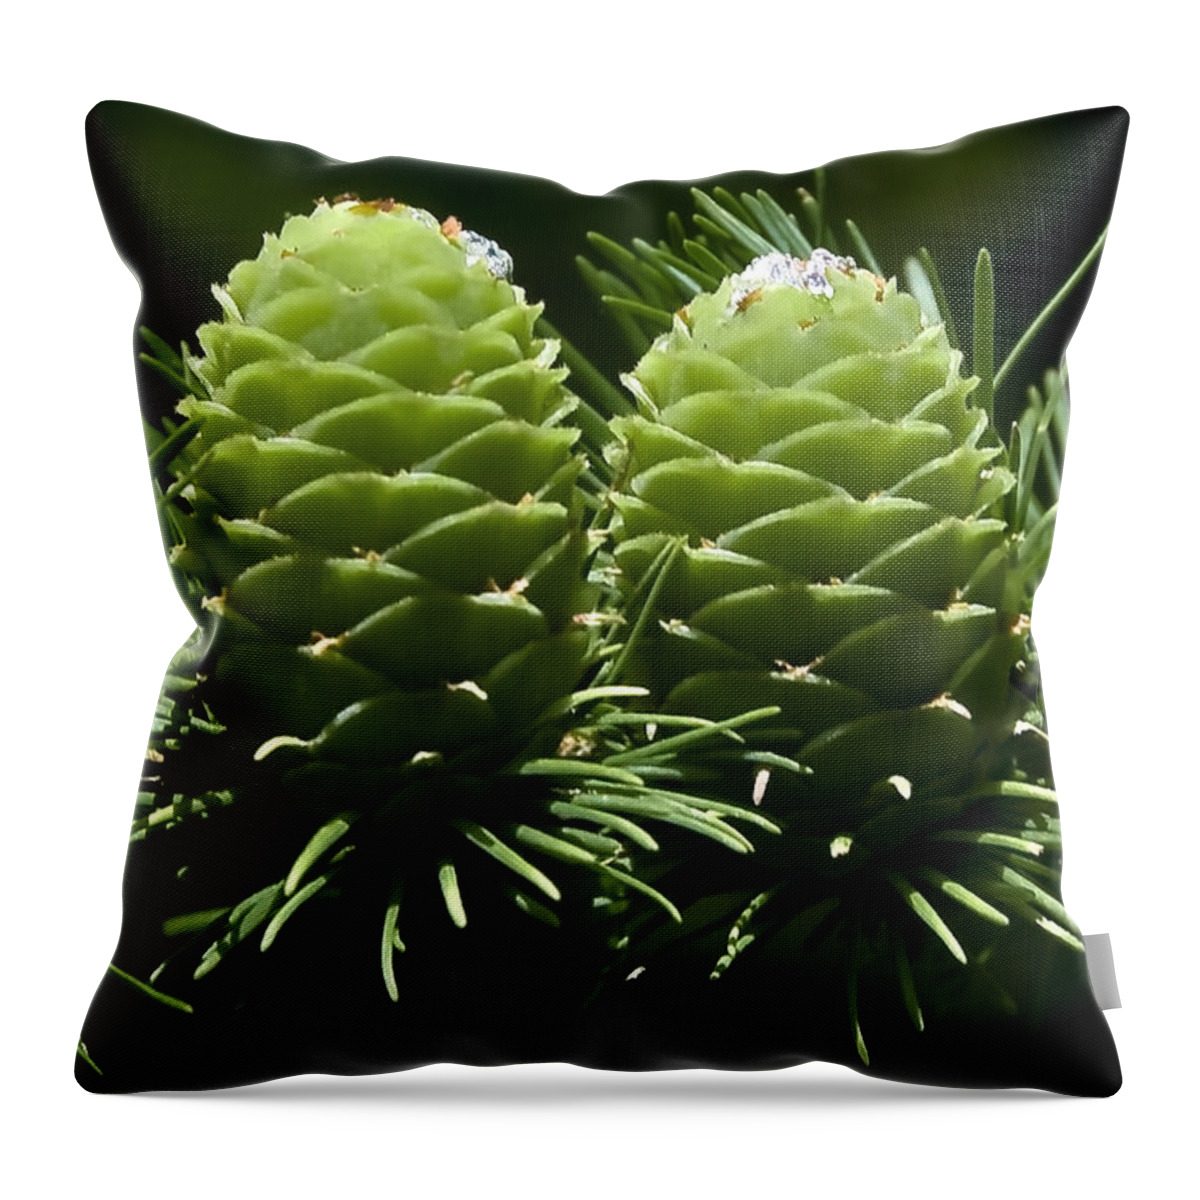 Two Throw Pillow featuring the photograph Two Pinecones by Svetlana Sewell